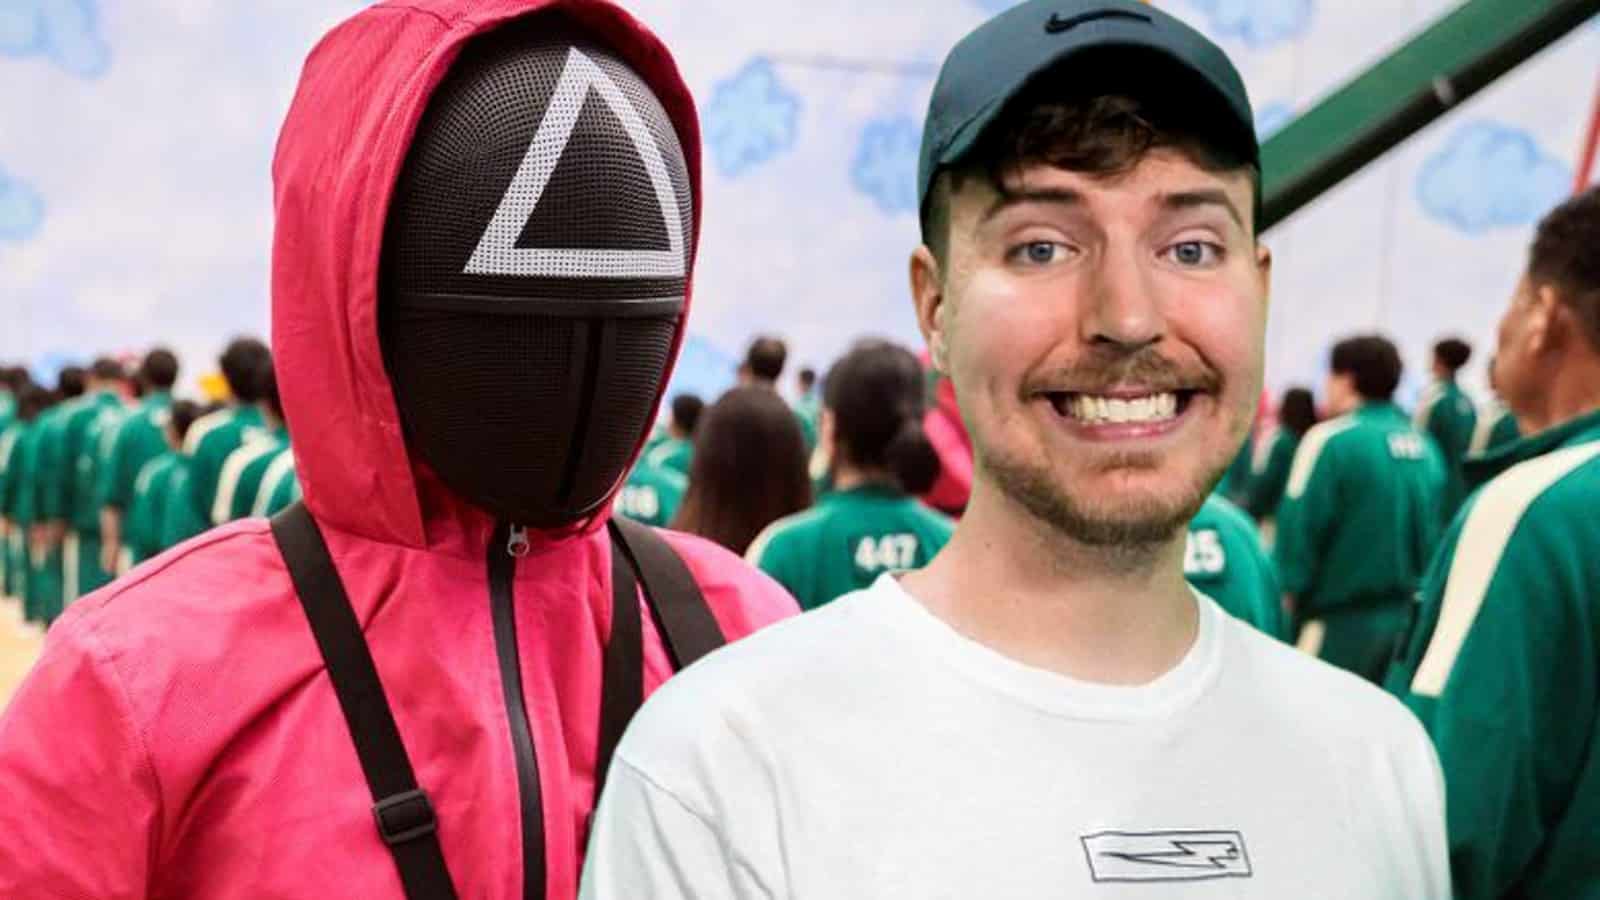 Who is going to be in MrBeast's Squid Game? - Dexerto